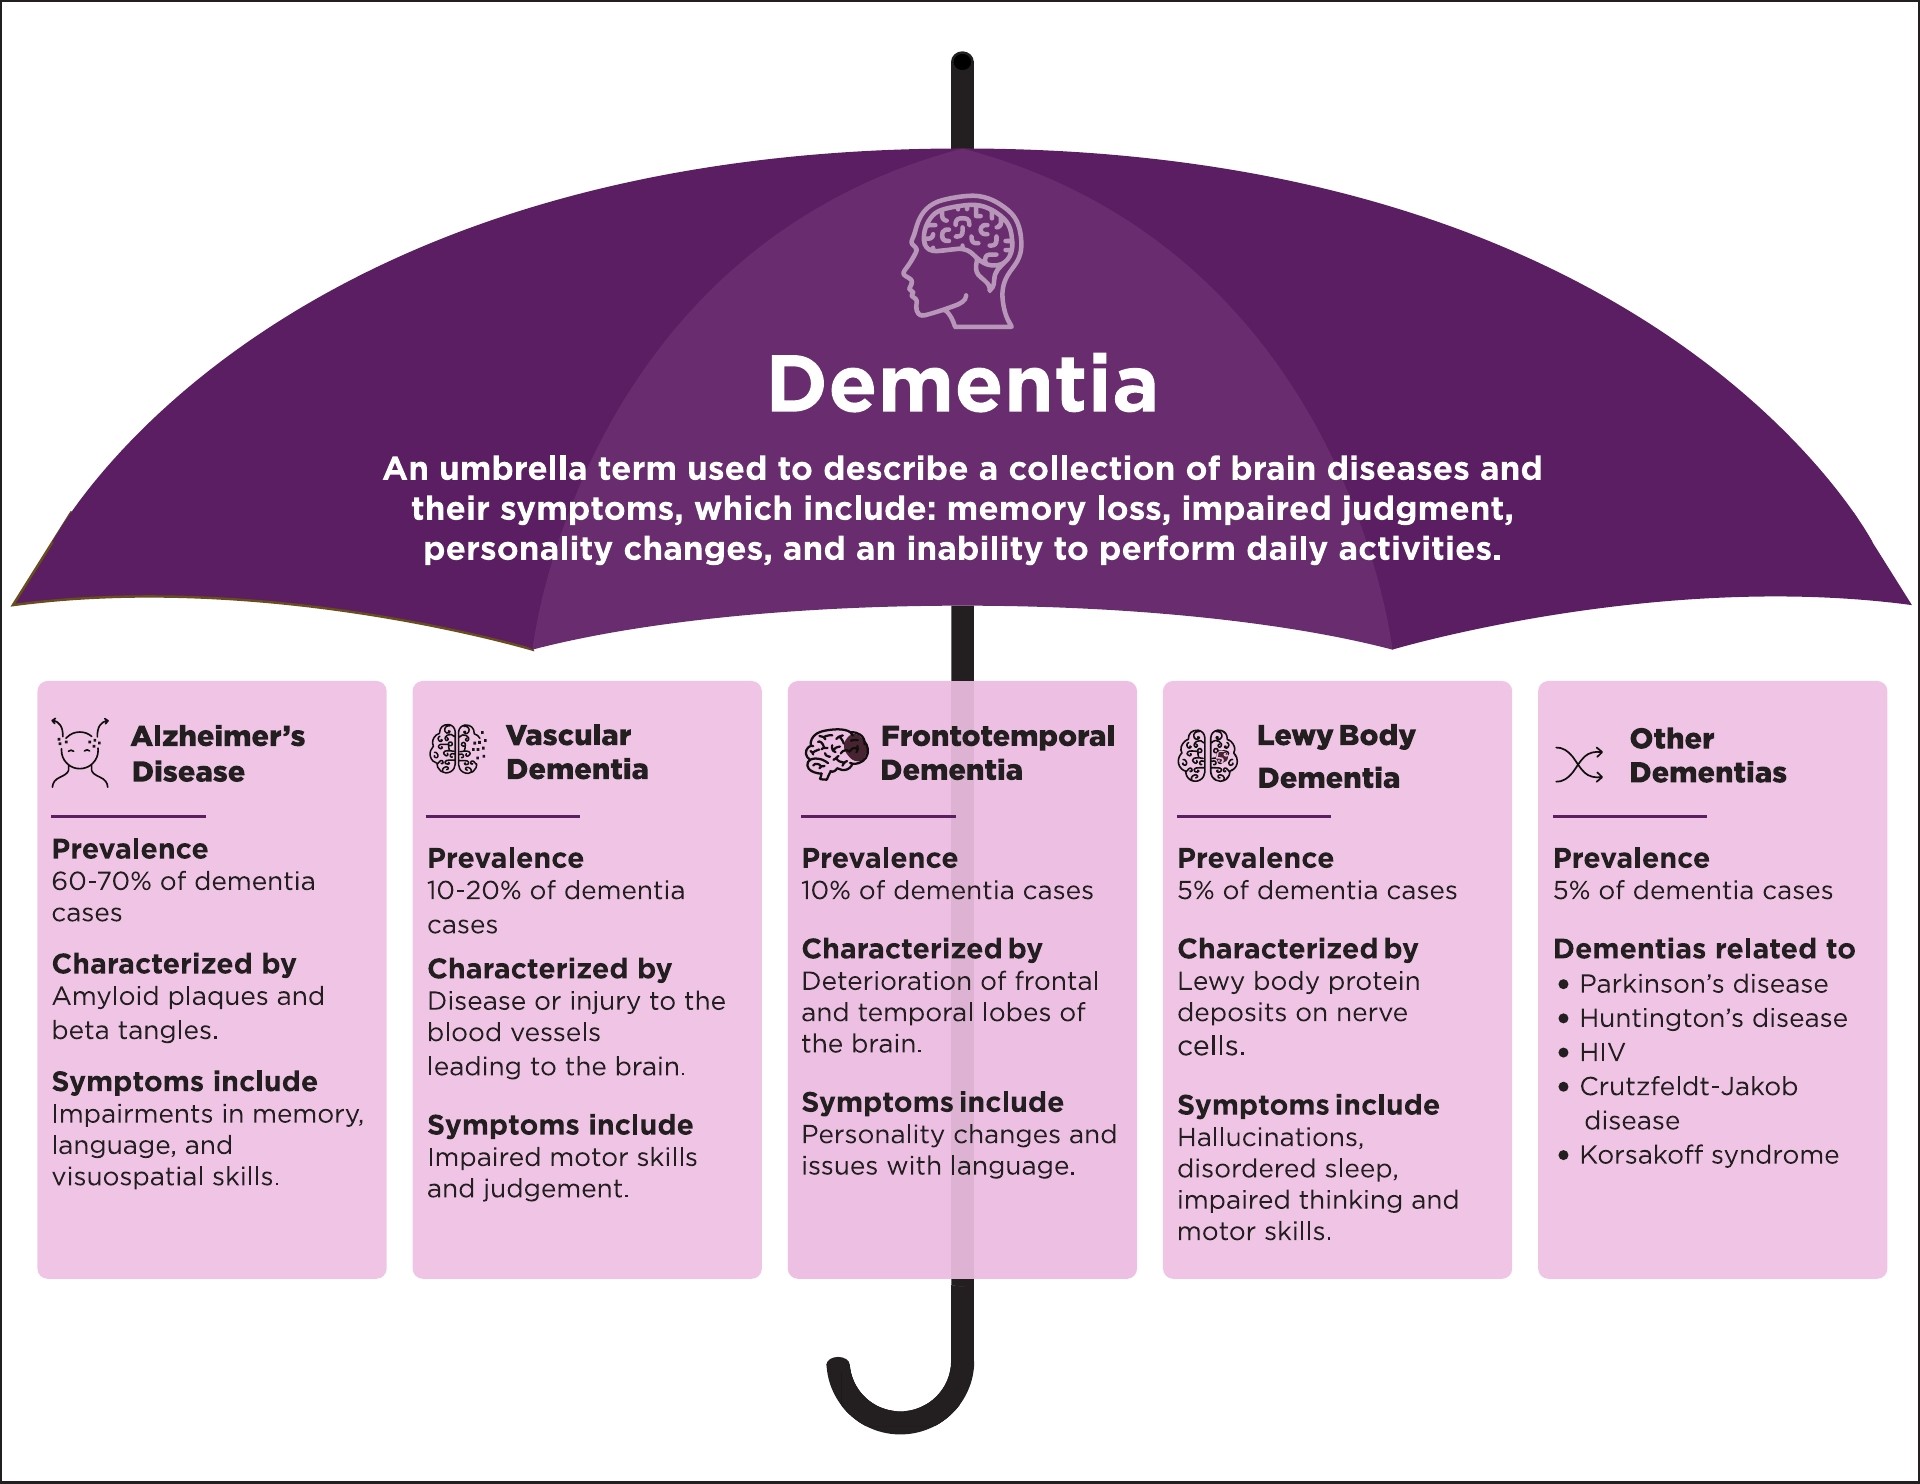 Dementia is an umbrella term used to describe a collection of brain diseases and their symptoms, which include: memory loss, impaired judgment, personality changes, and an inability to perform daily activities.